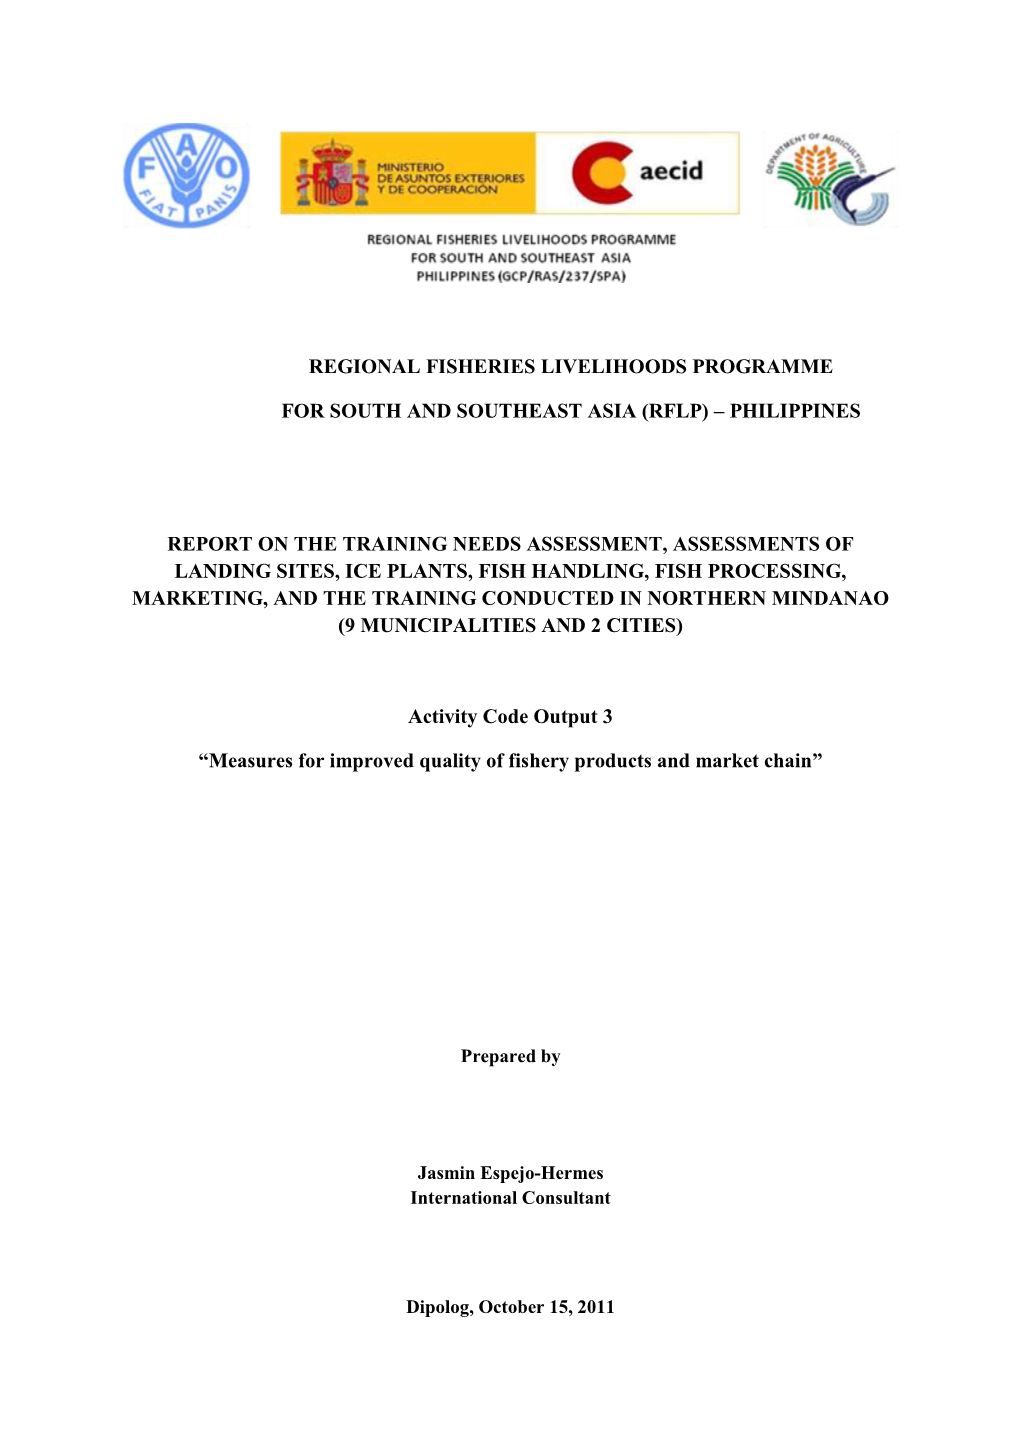 Regional Fisheries Livelihoods Programme for South and Southeast Asia (GCP/RAS/237/SPA) - Philippines Field Project Document 2011/PHI/1